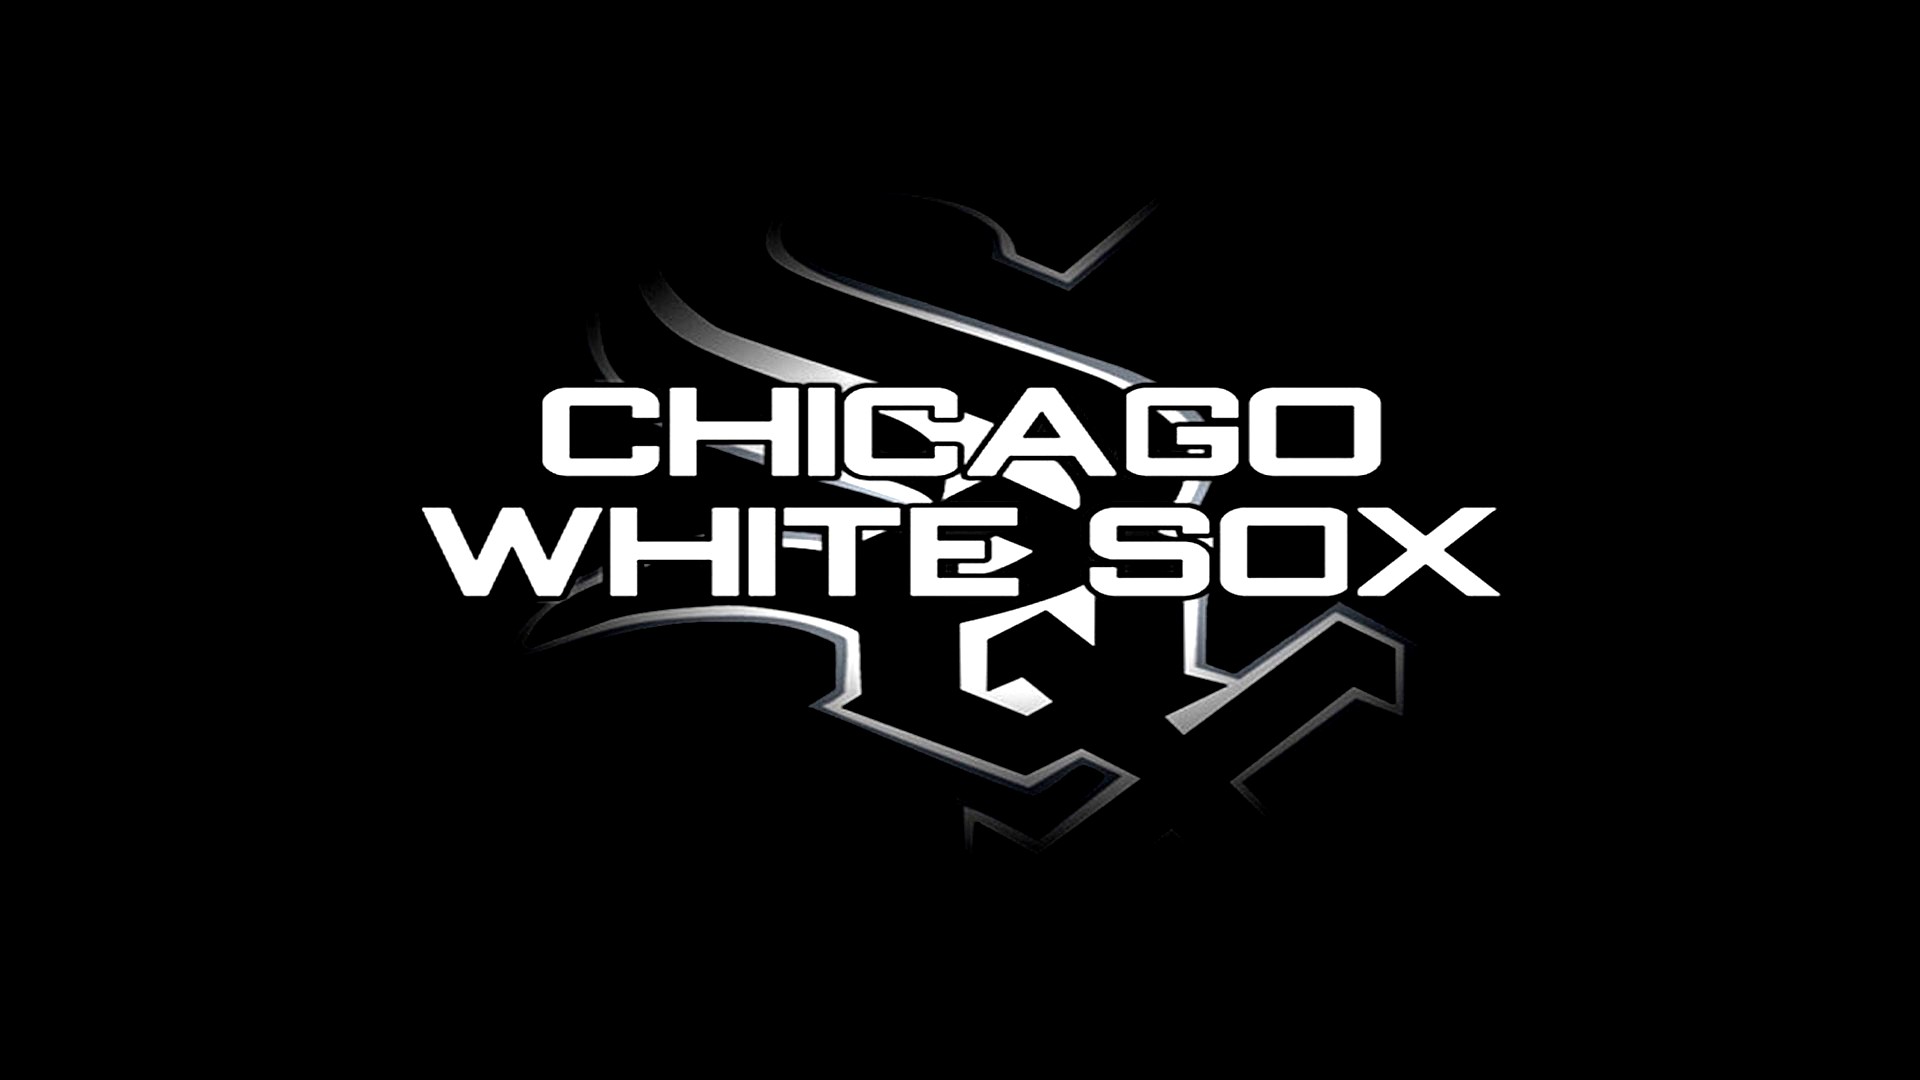 Chicago White Sox Wallpaper For Mac Wallpaper with high-resolution 1920x1080 pixel. You can use this wallpaper for Mac Desktop Wallpaper, Laptop Screensavers, Android Wallpapers, Tablet or iPhone Home Screen and another mobile phone device